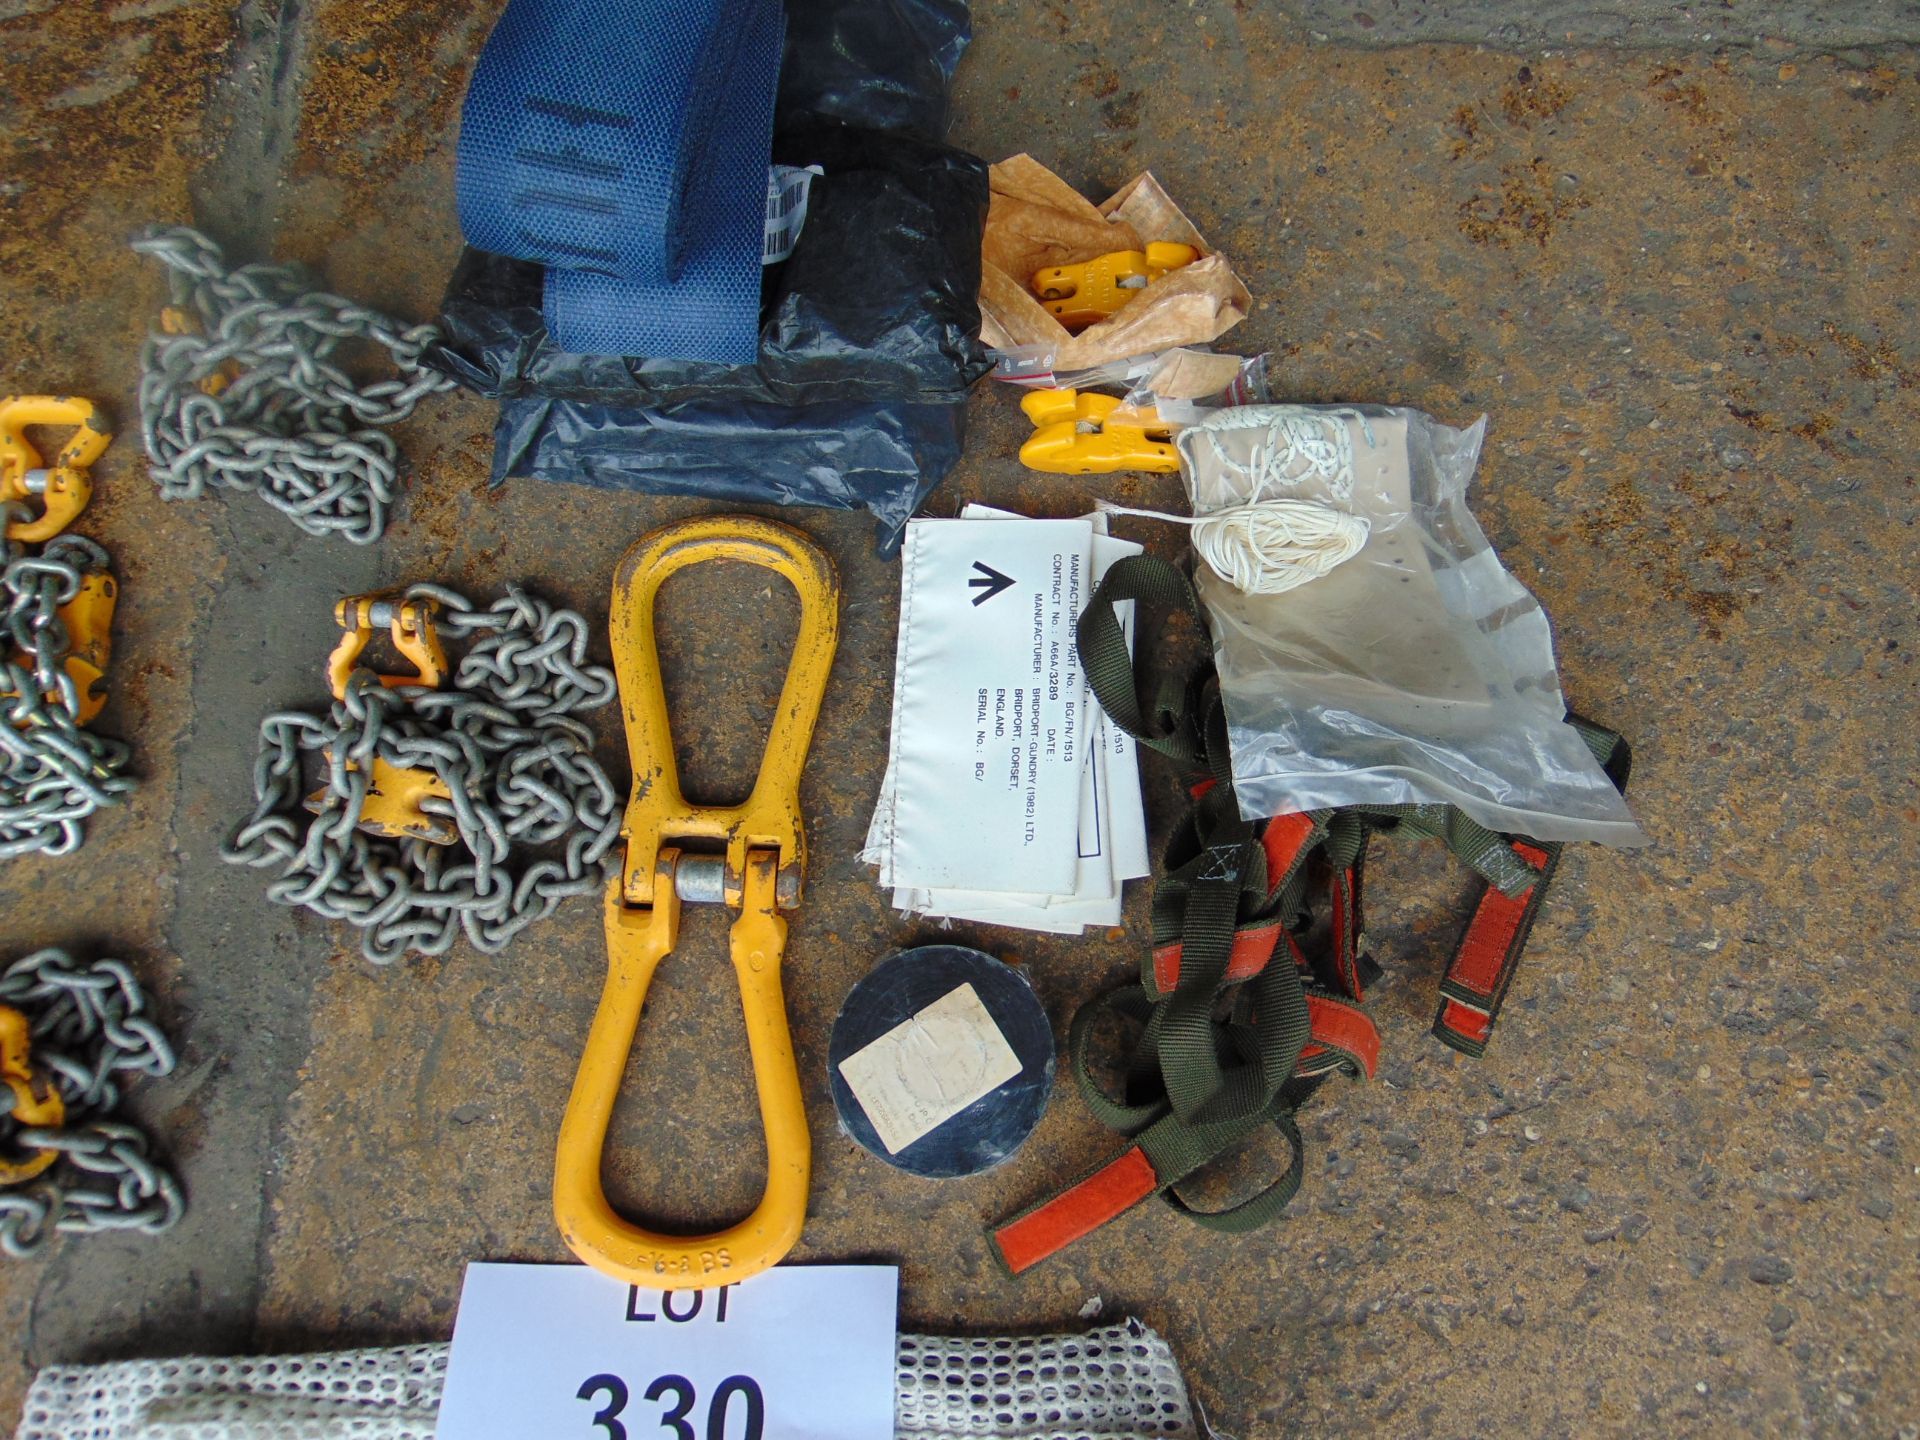 Lifting Kit c/w chains Straps etc Unissued - Image 2 of 4